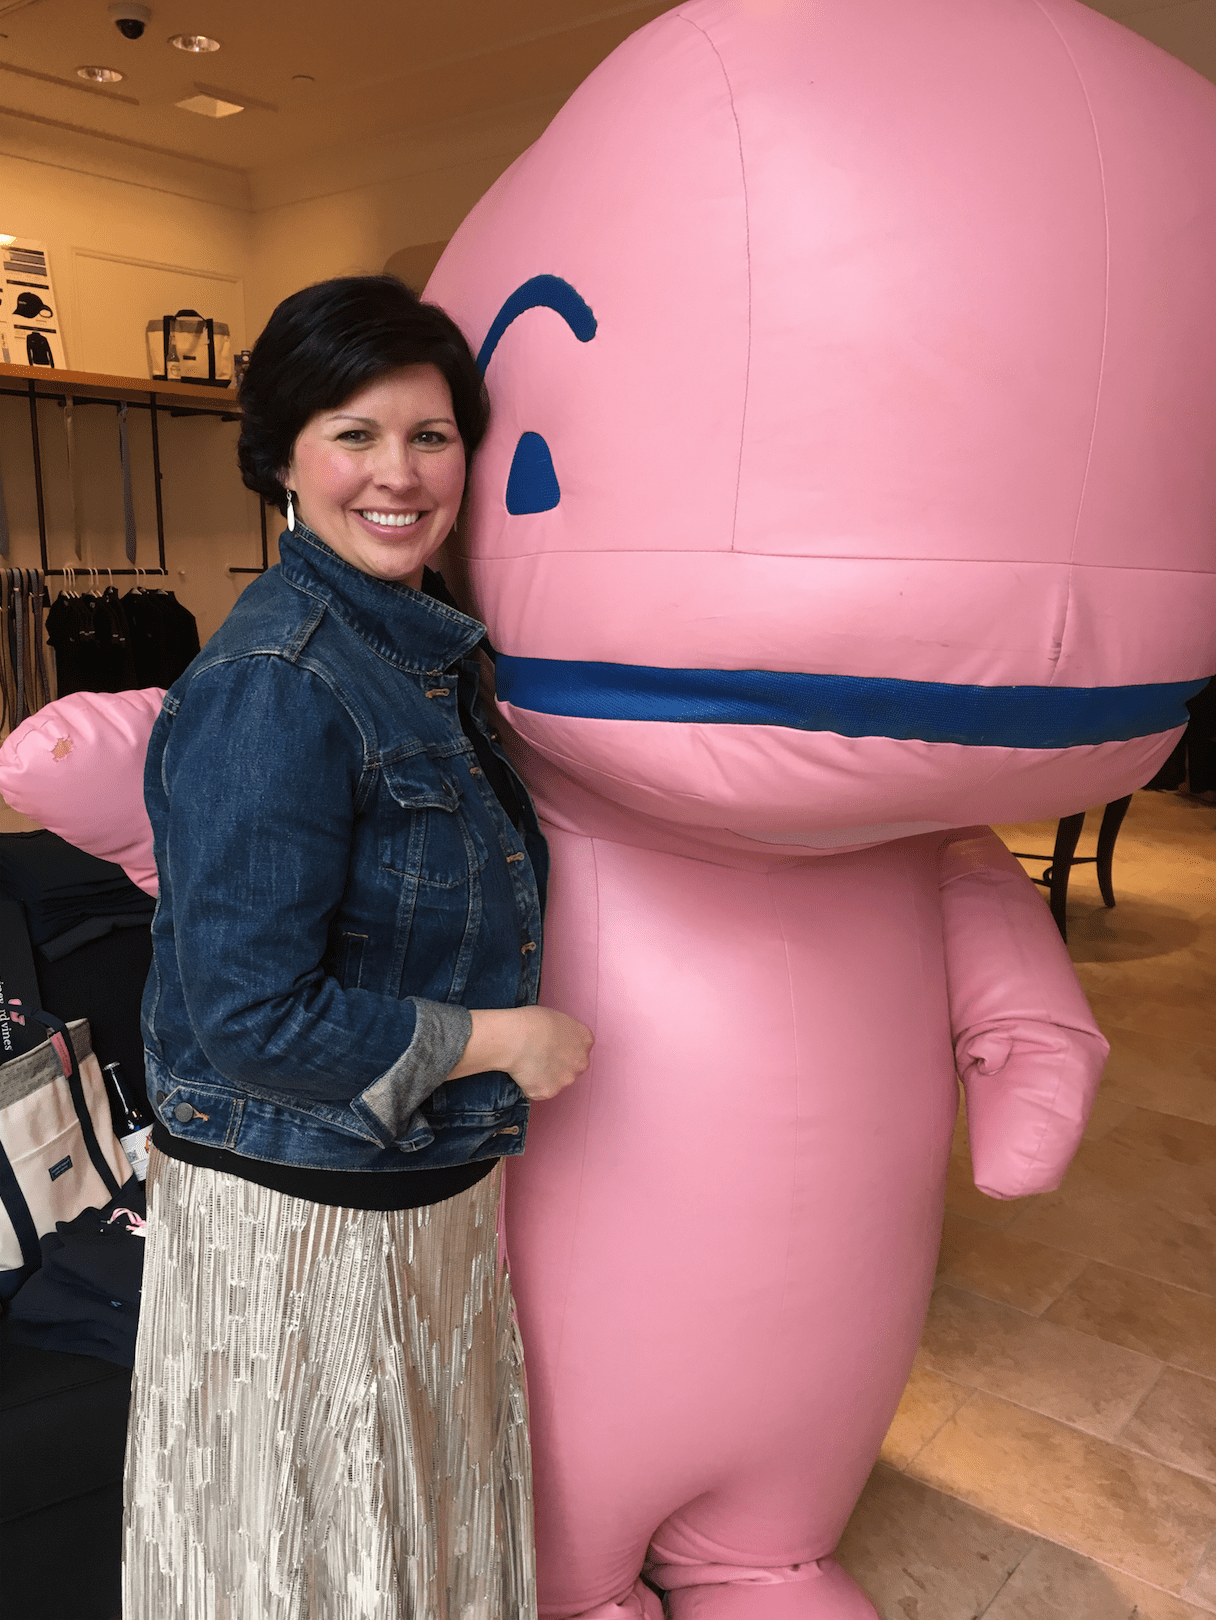 Director of Marketing & Communications at Bridge Family Center Amanda Aronson with the Vineyard Vines Whale Mascot at the We-Ha Pop-Up Store in Blue Back Square. Photo credit: Joy Taylor